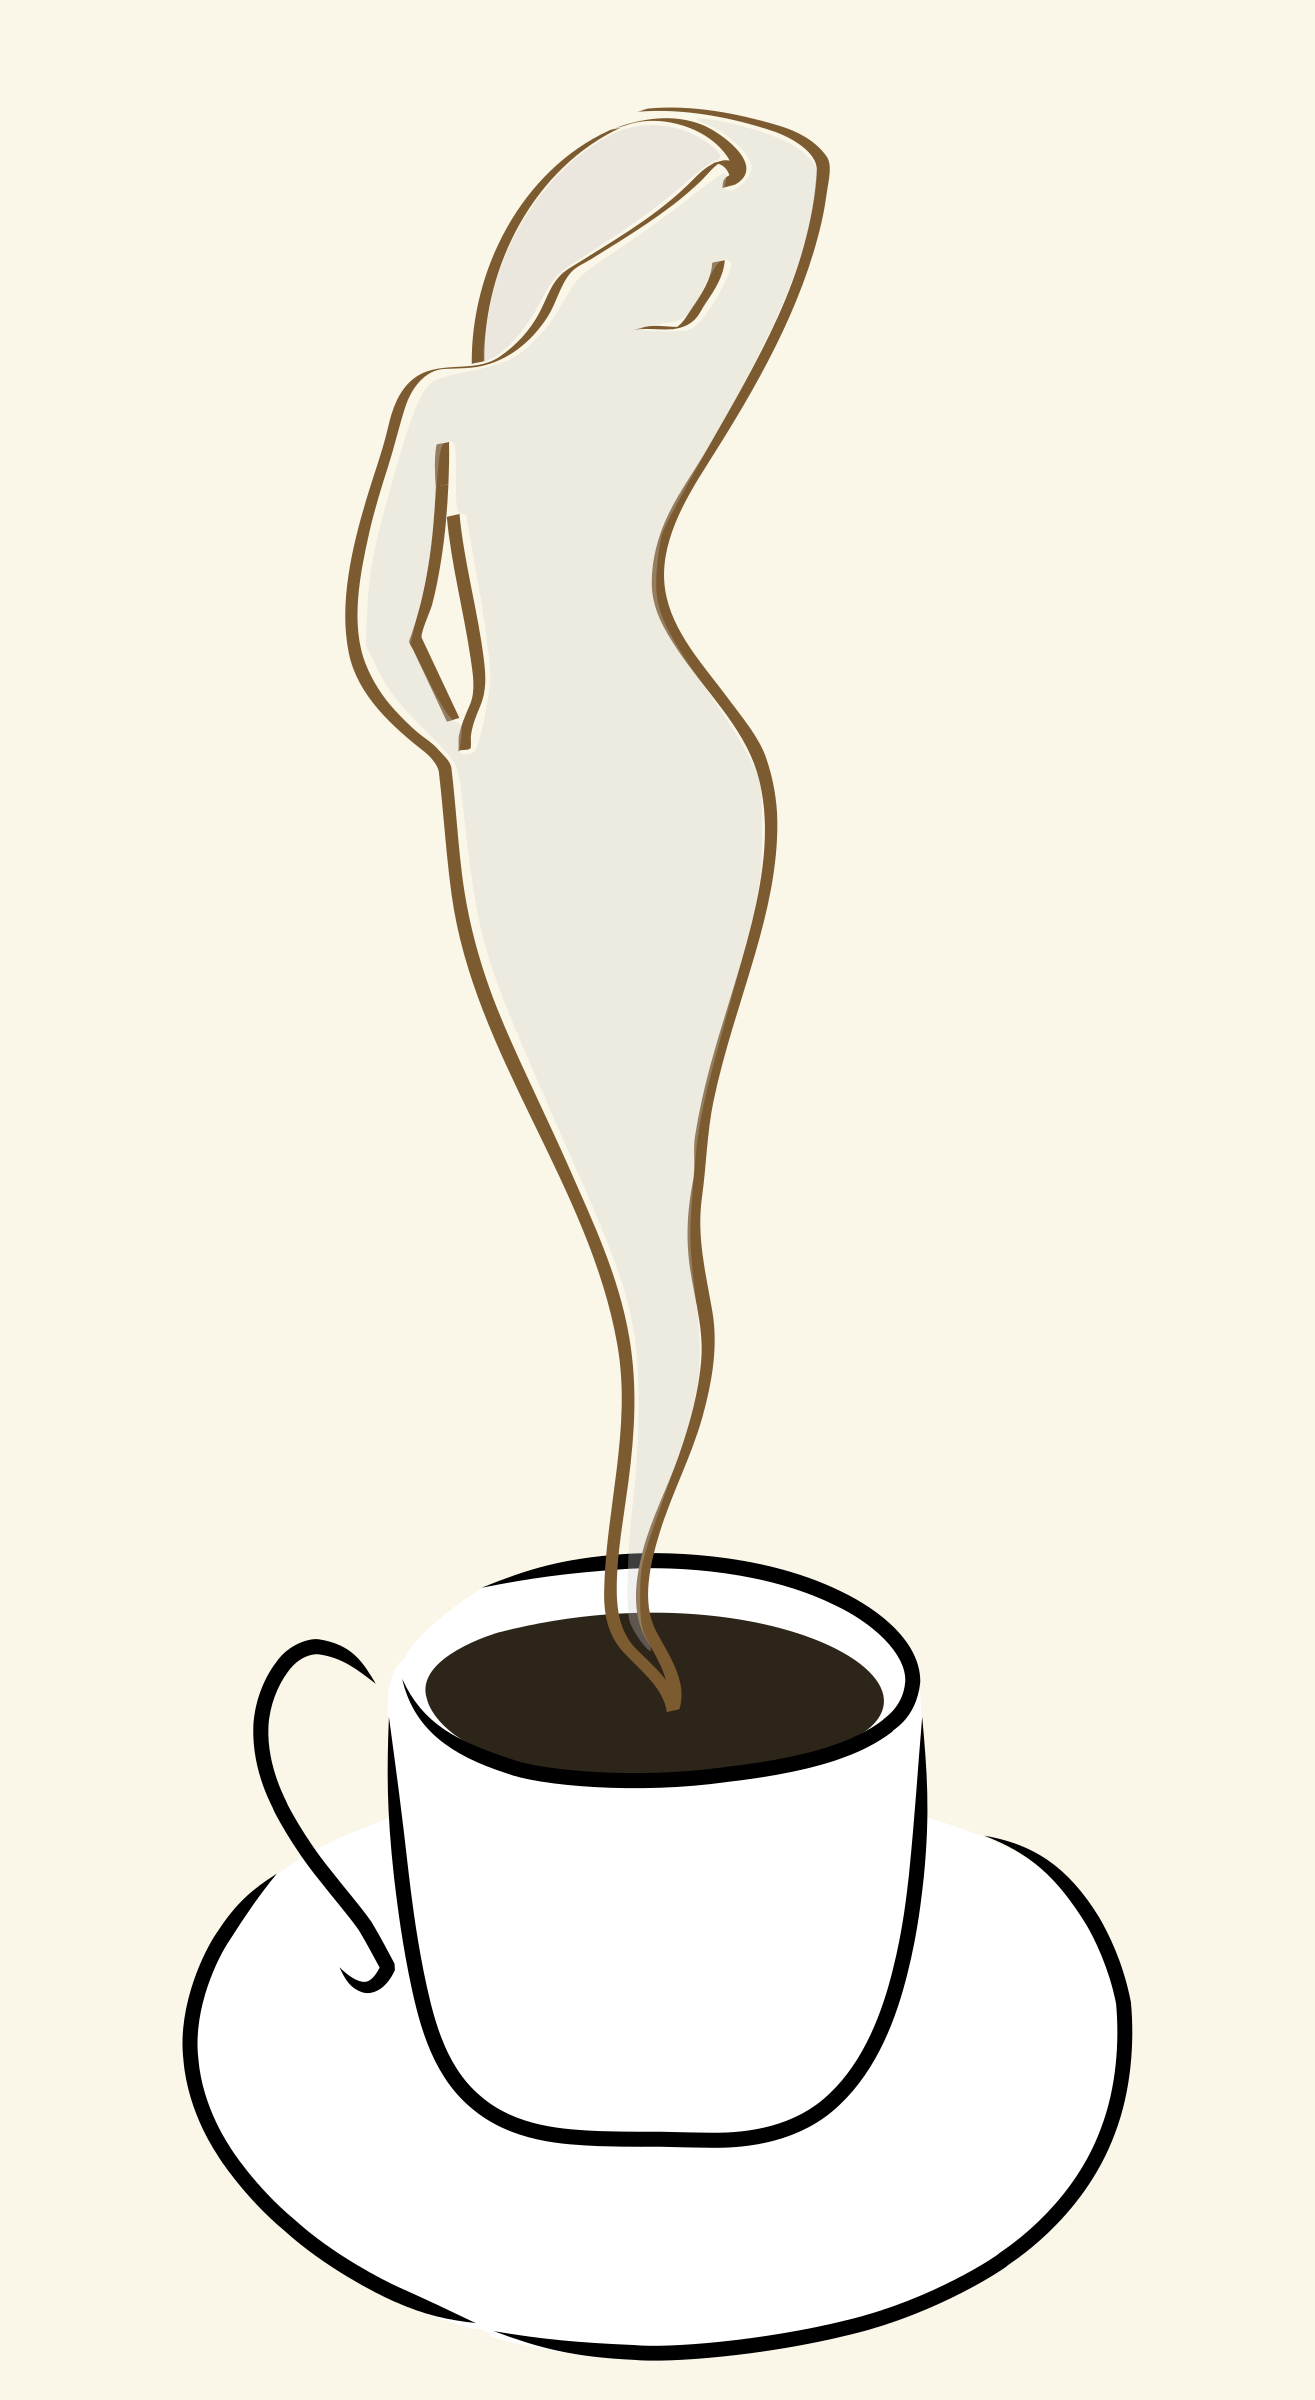 Of black coffee image. Clipart cup big cup